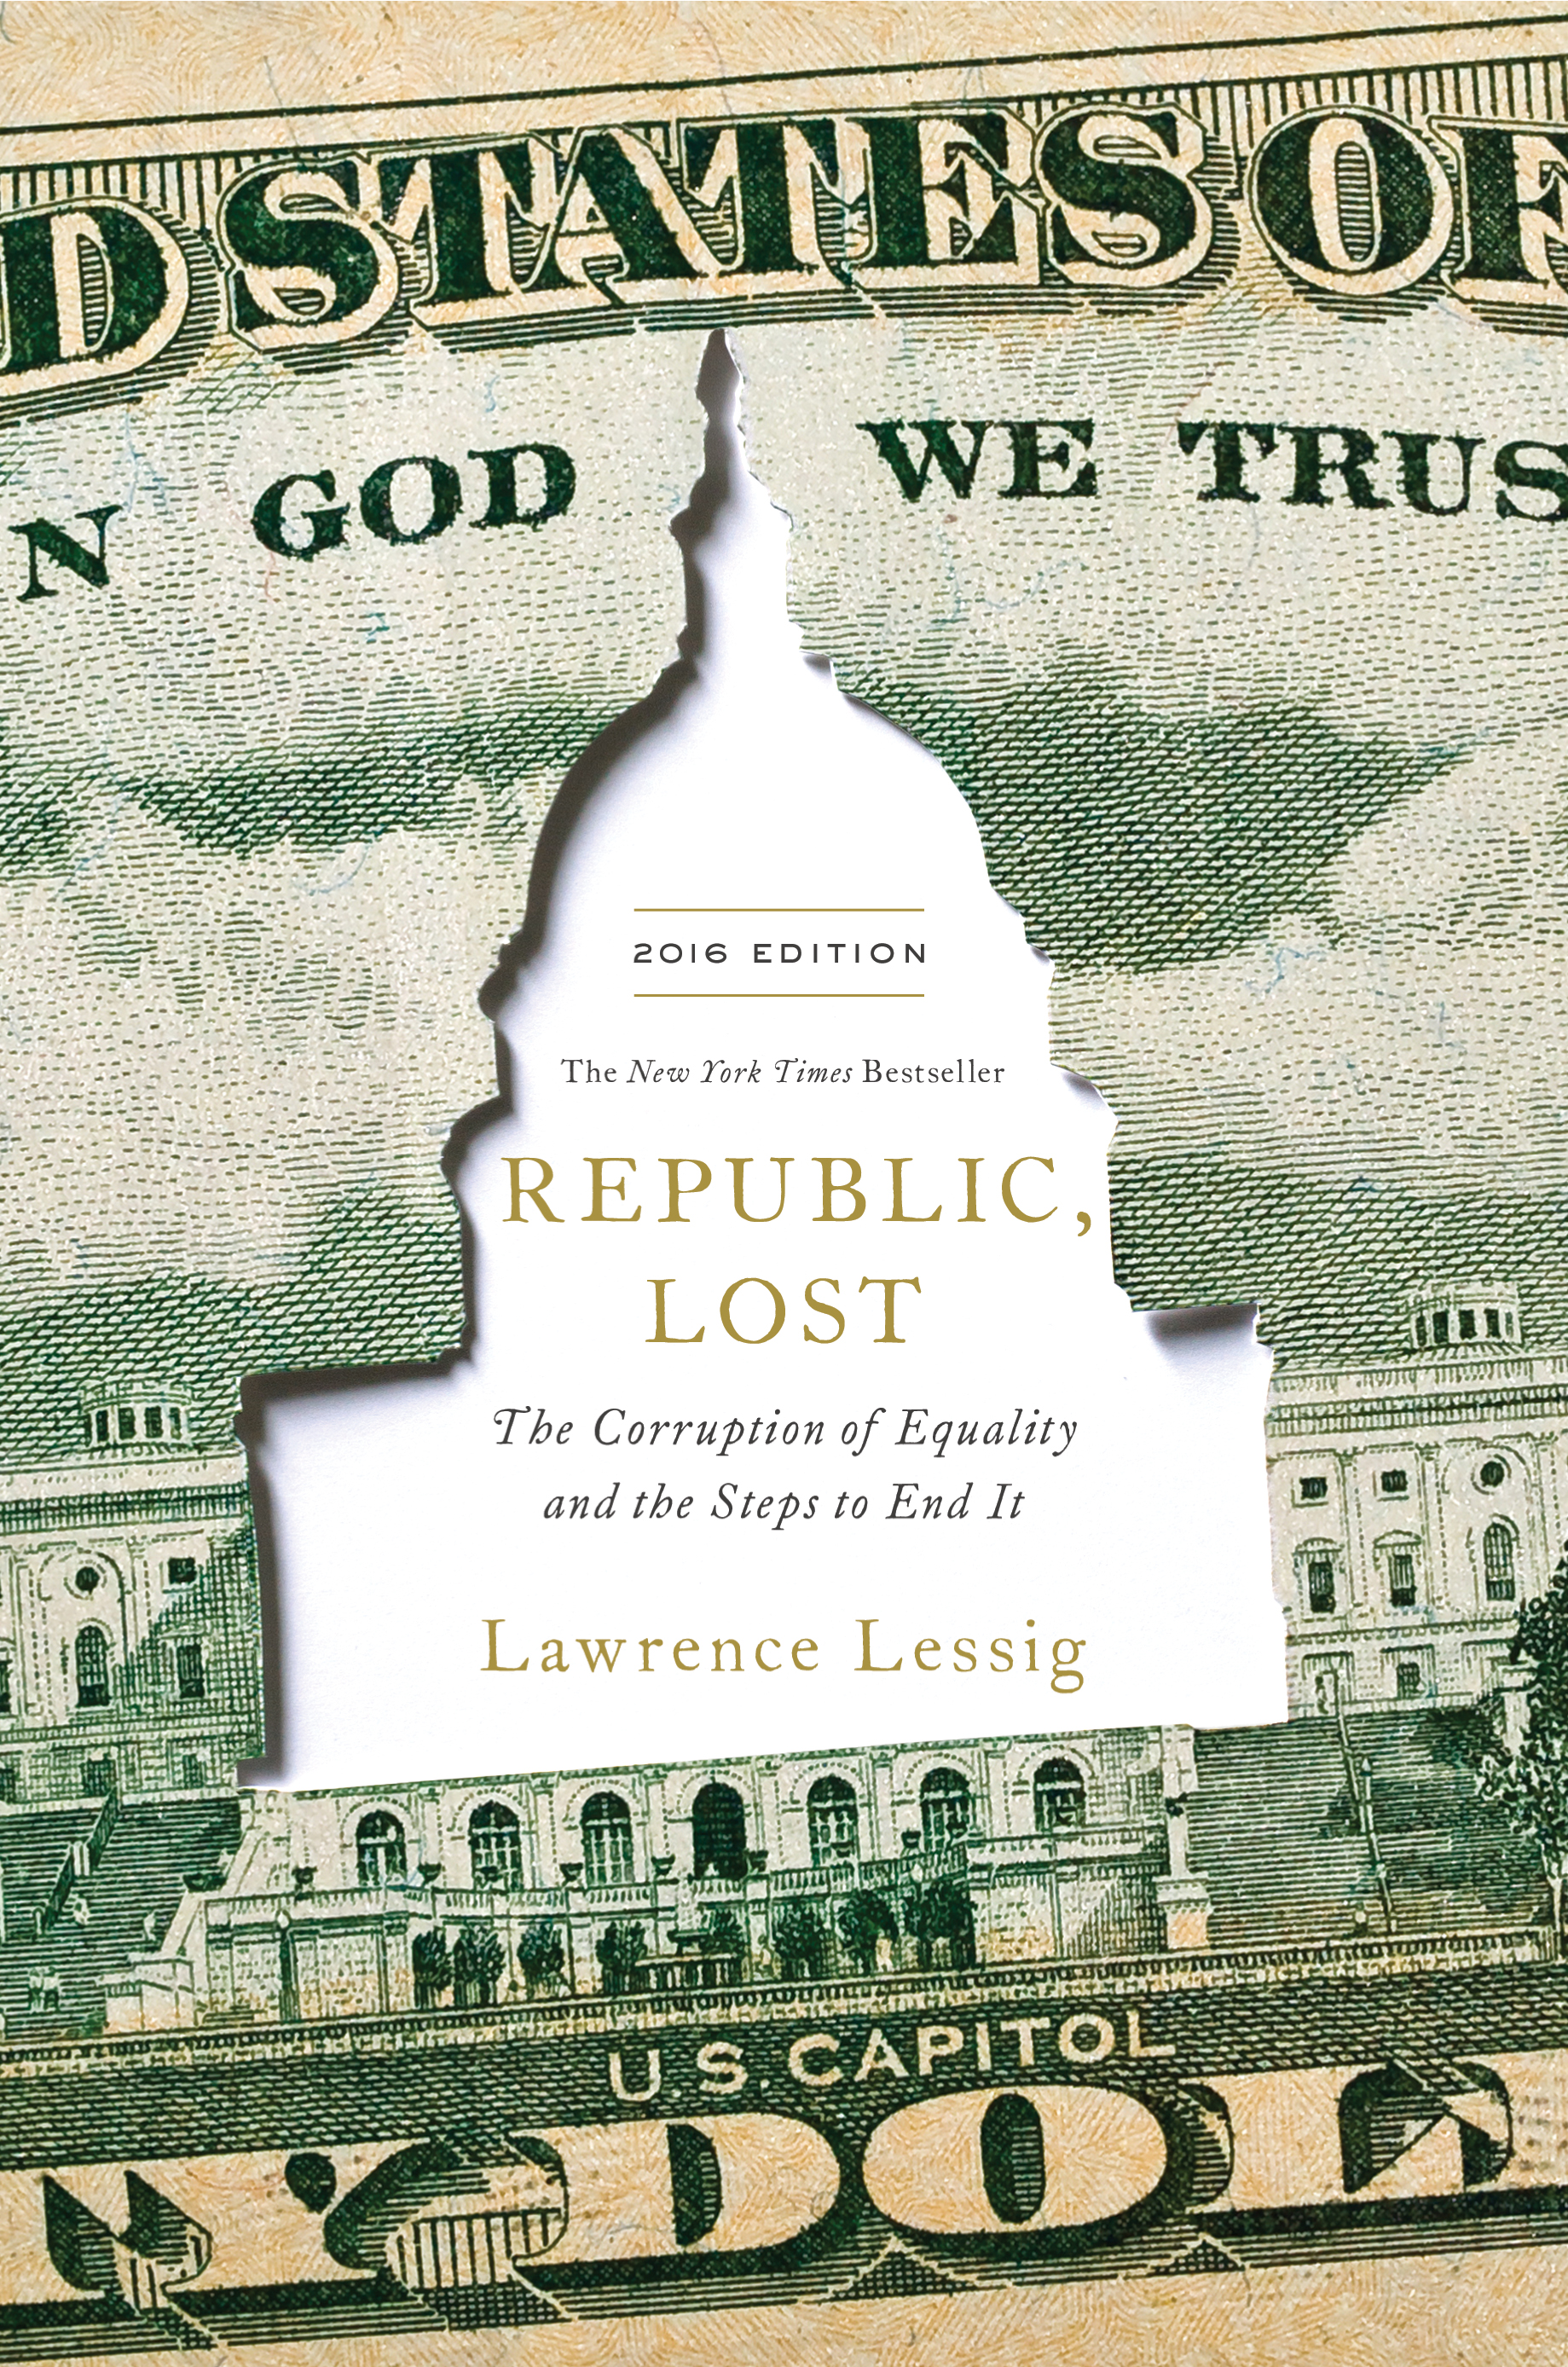 The cover of the forthcoming revised edition of Lessig's 2011 book, REPUBLIC, LOST. (Twelve Books)